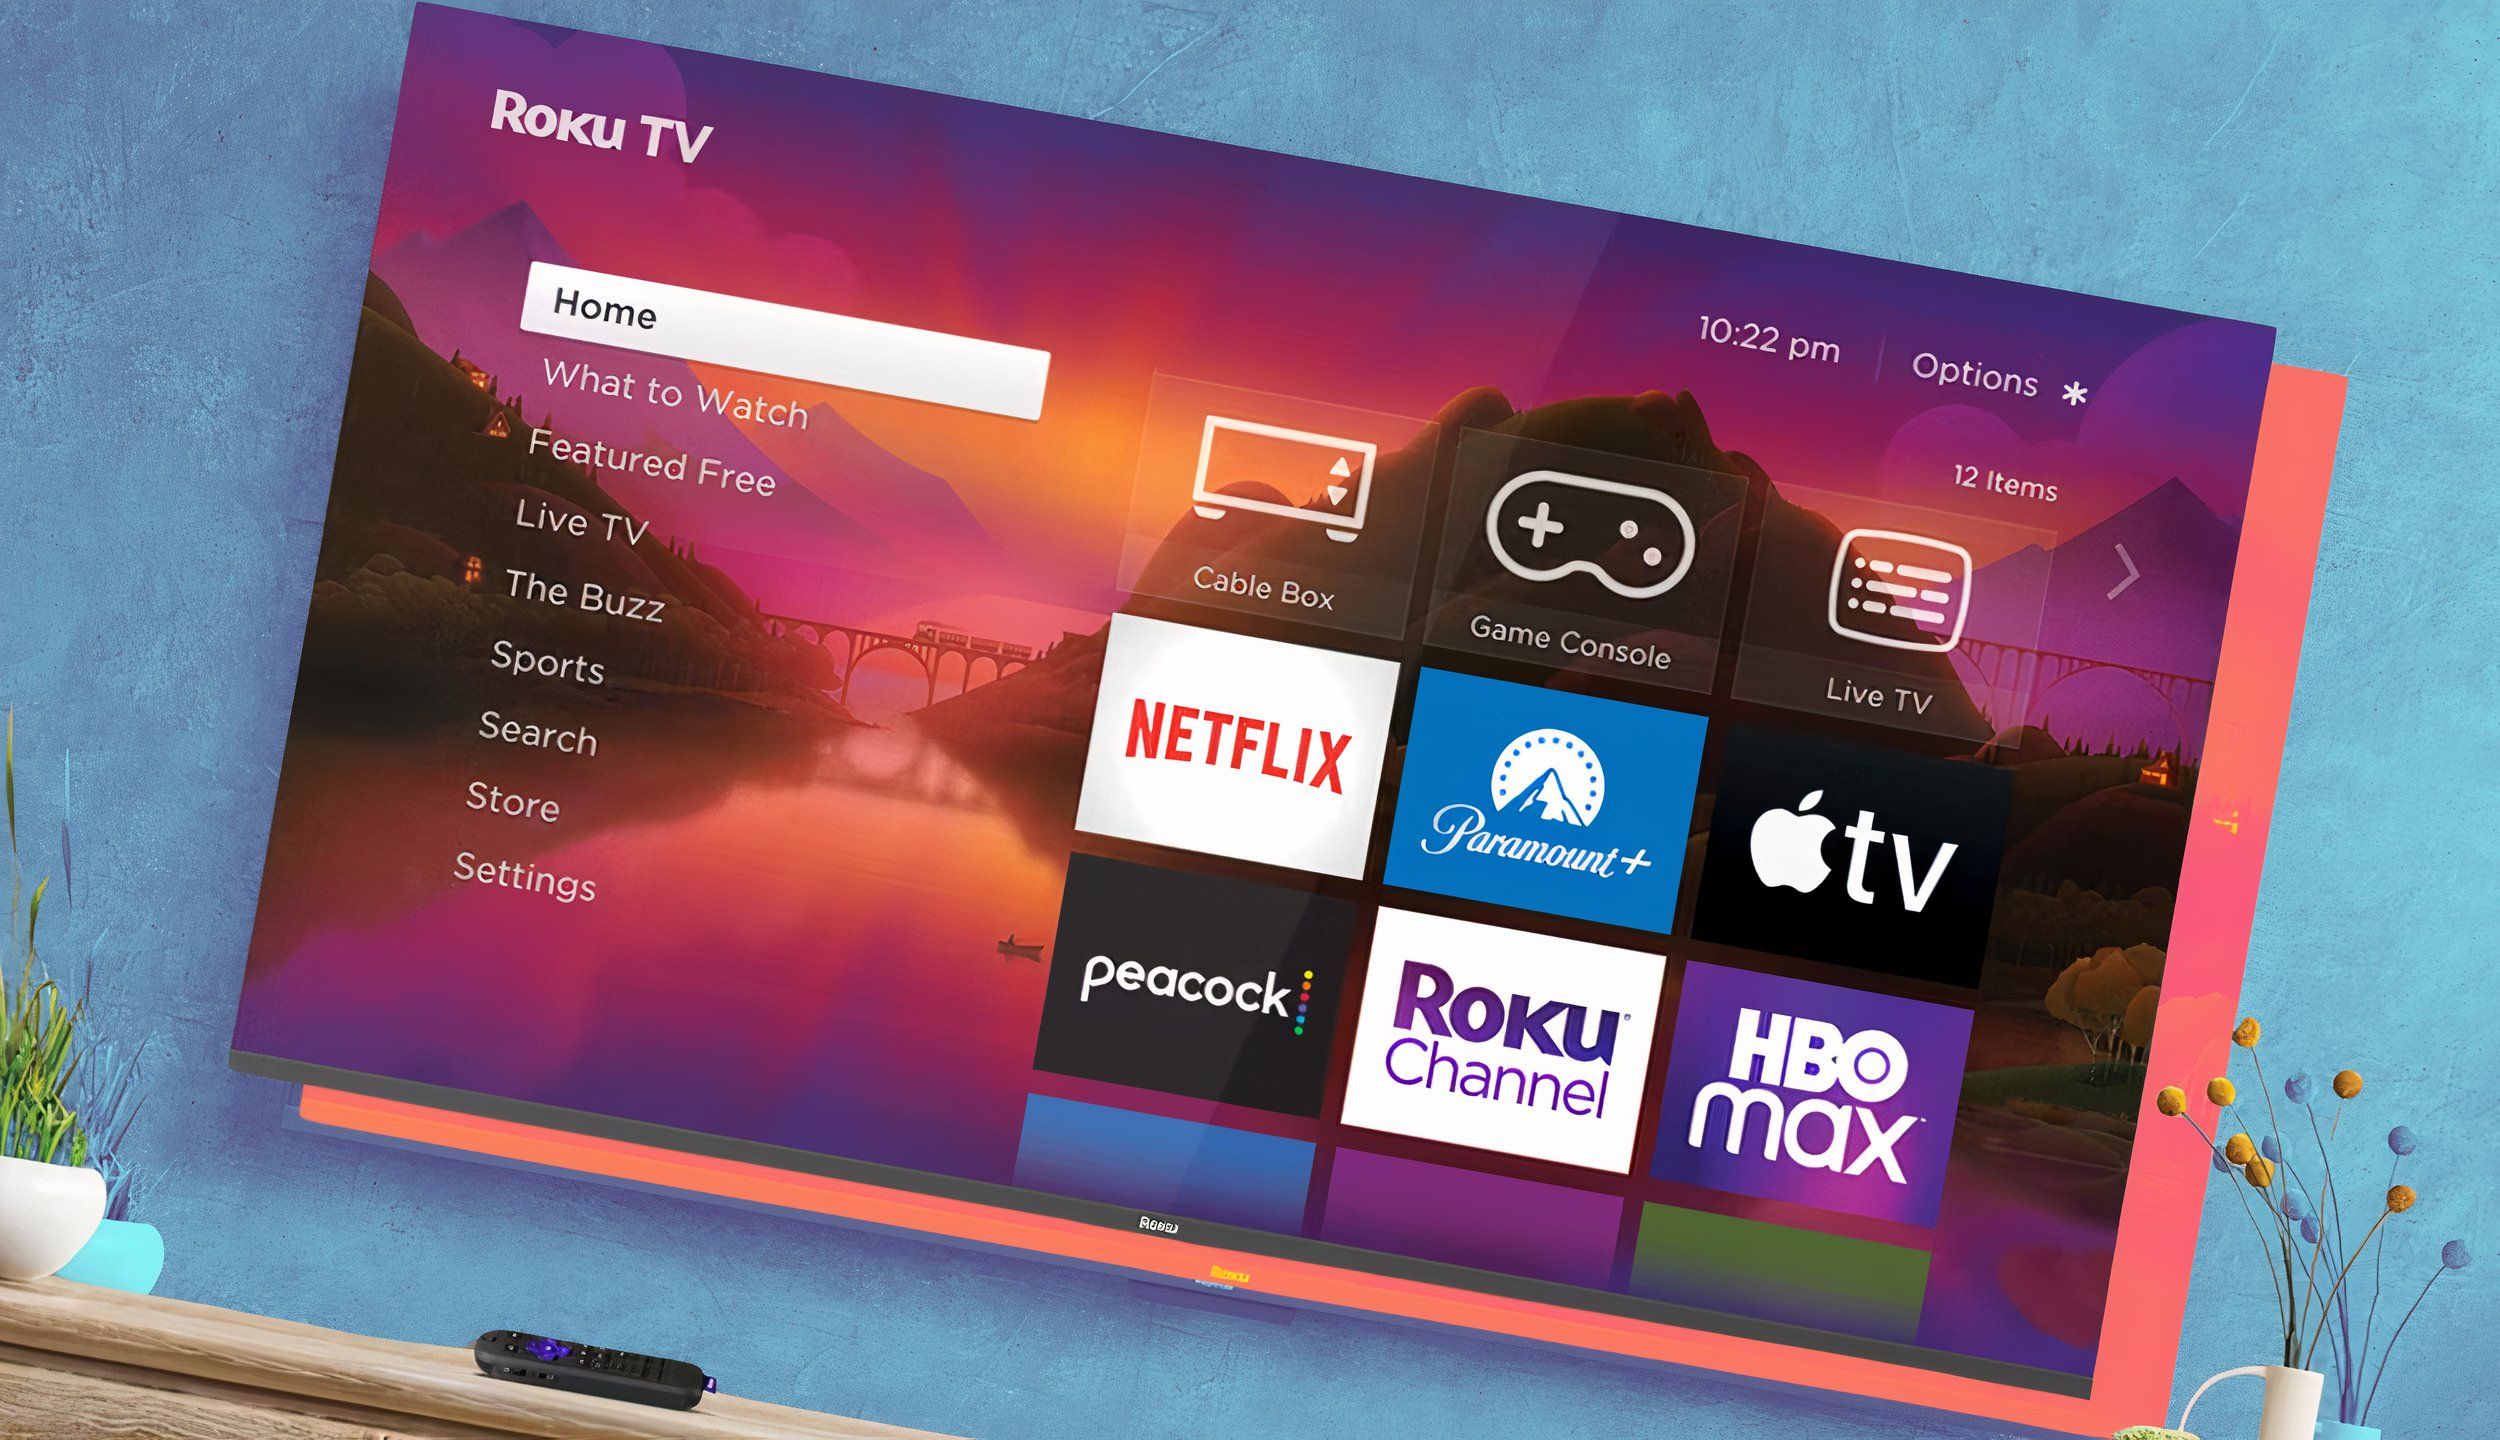 5 Roku OS features I use to get the most out of my TV